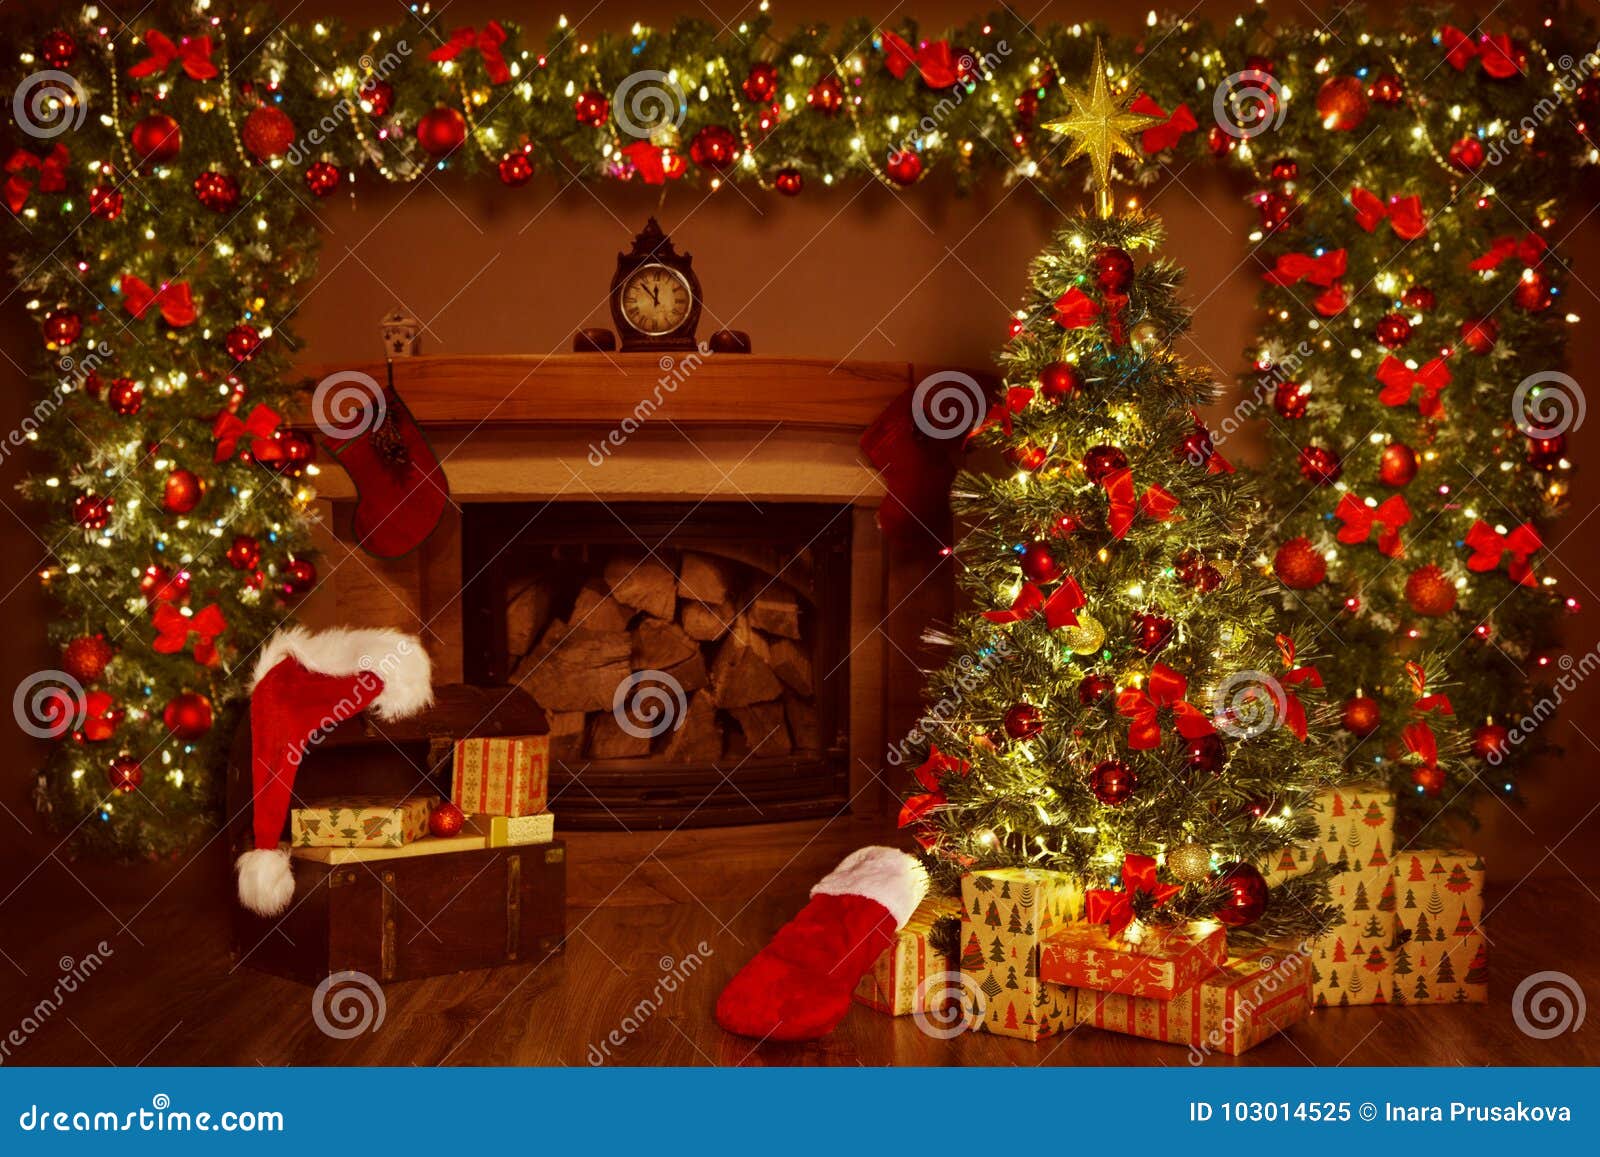 christmas fireplace and xmas tree, presents gifts decorations